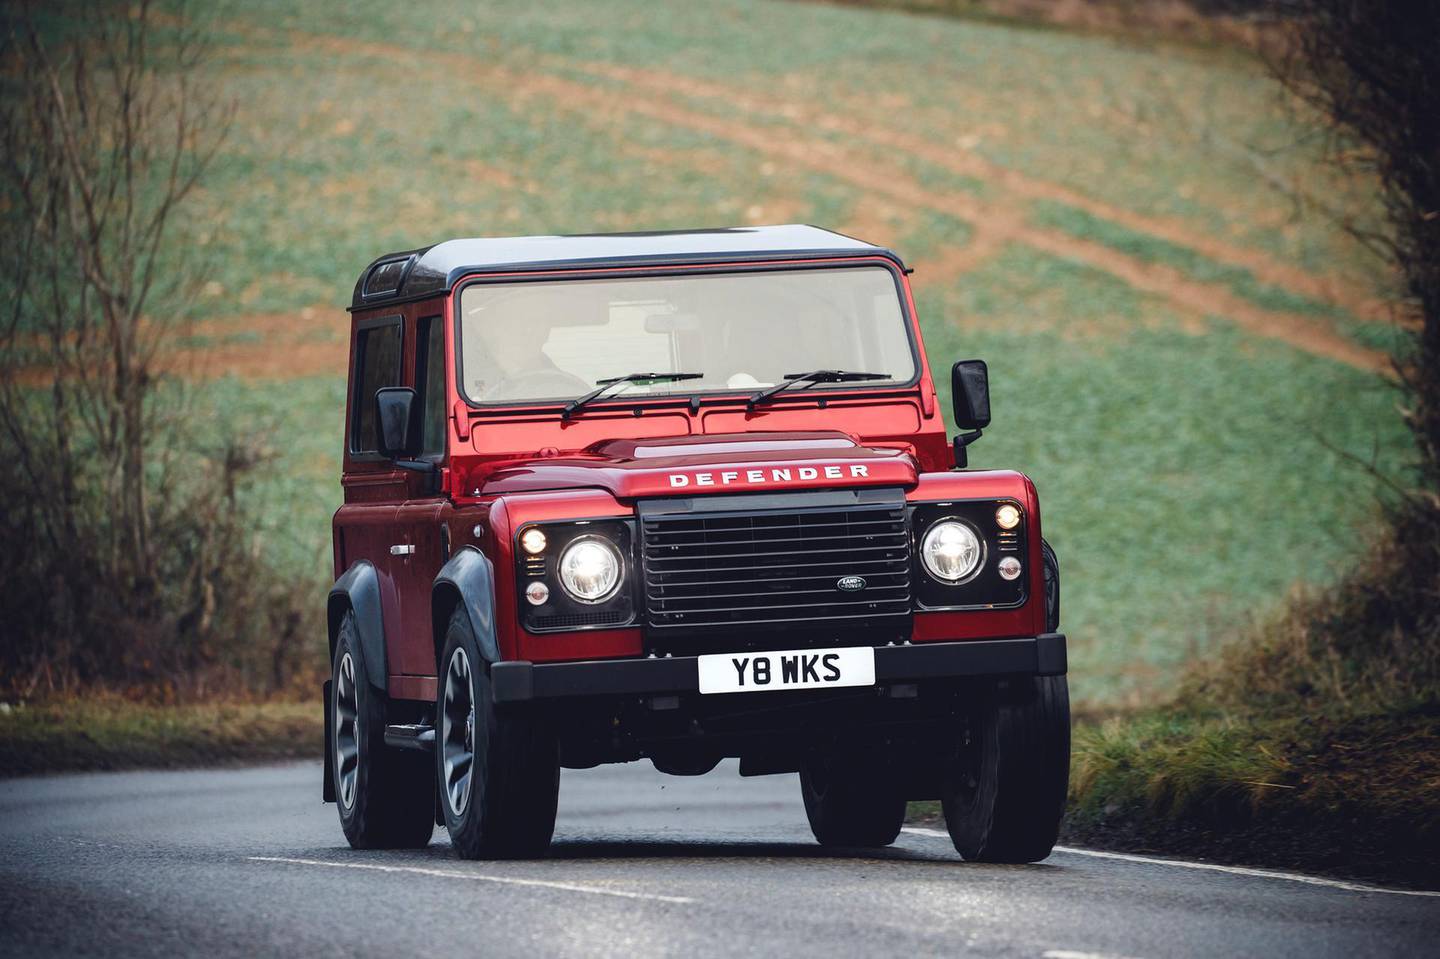 A new Land Rover Defender is to go on sale soon. Courtesy Jaguar Land Rover